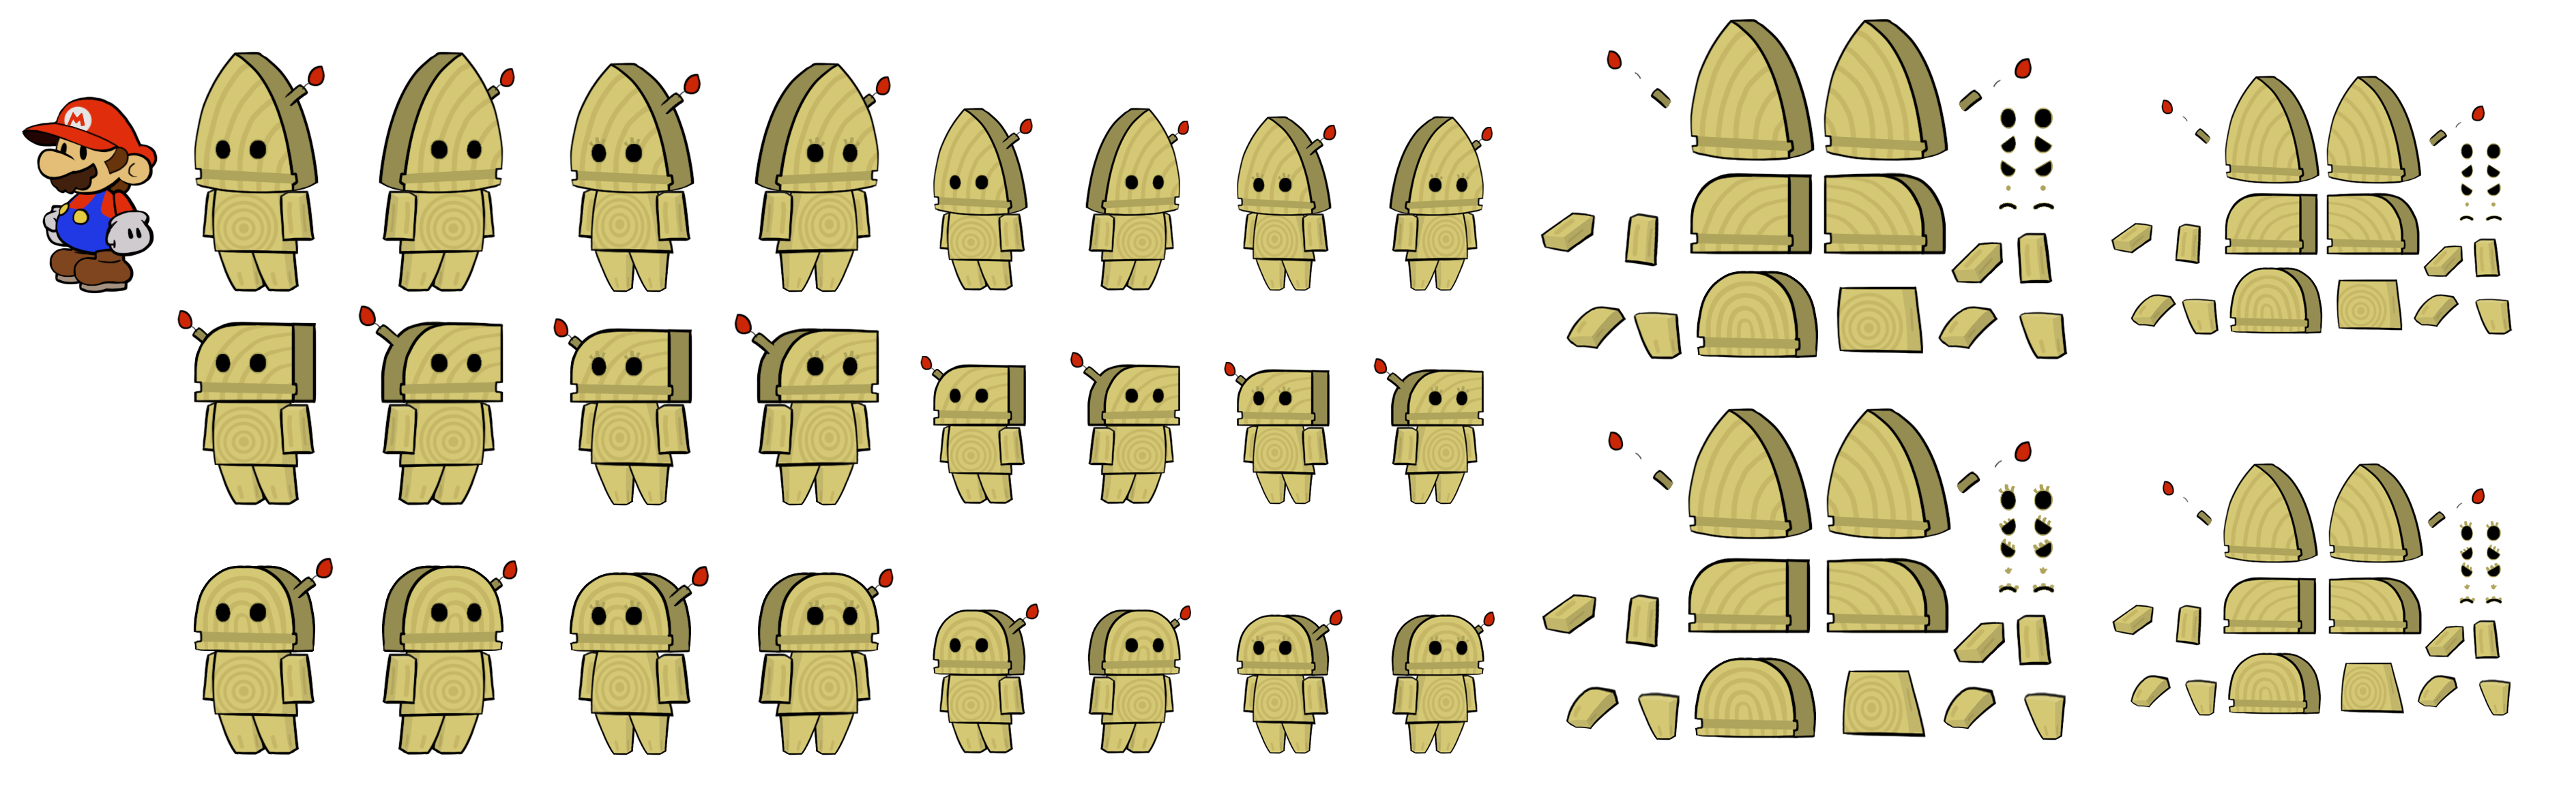 Whittles (Paper Mario-Style)